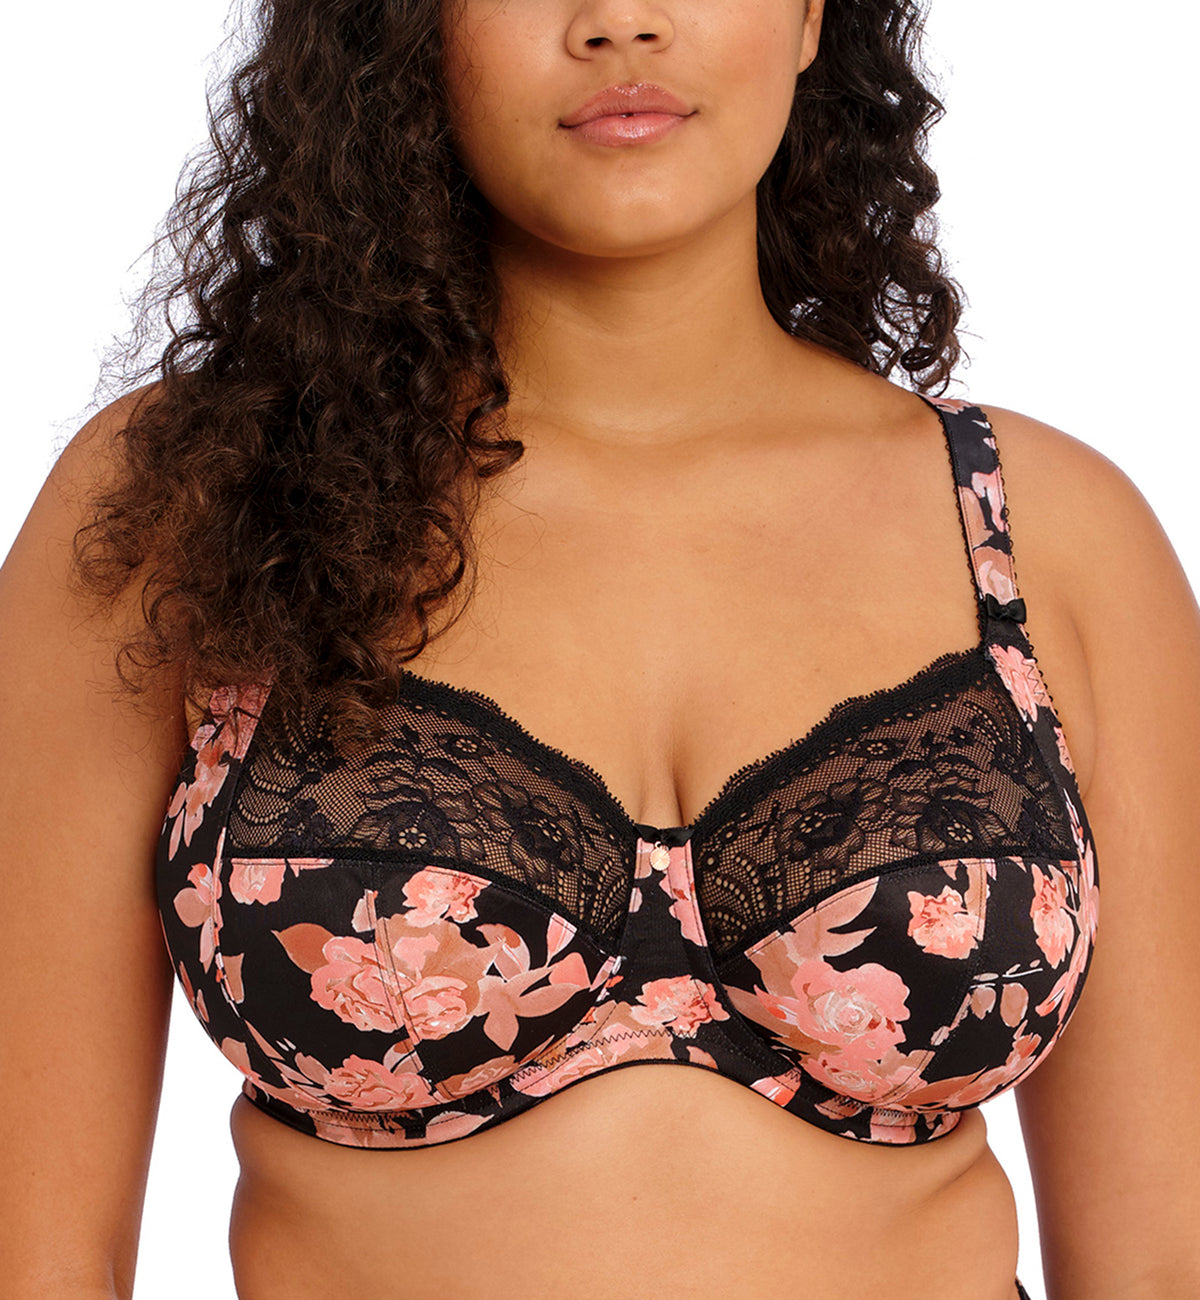 Size 44K Supportive Plus Size Bras For Women